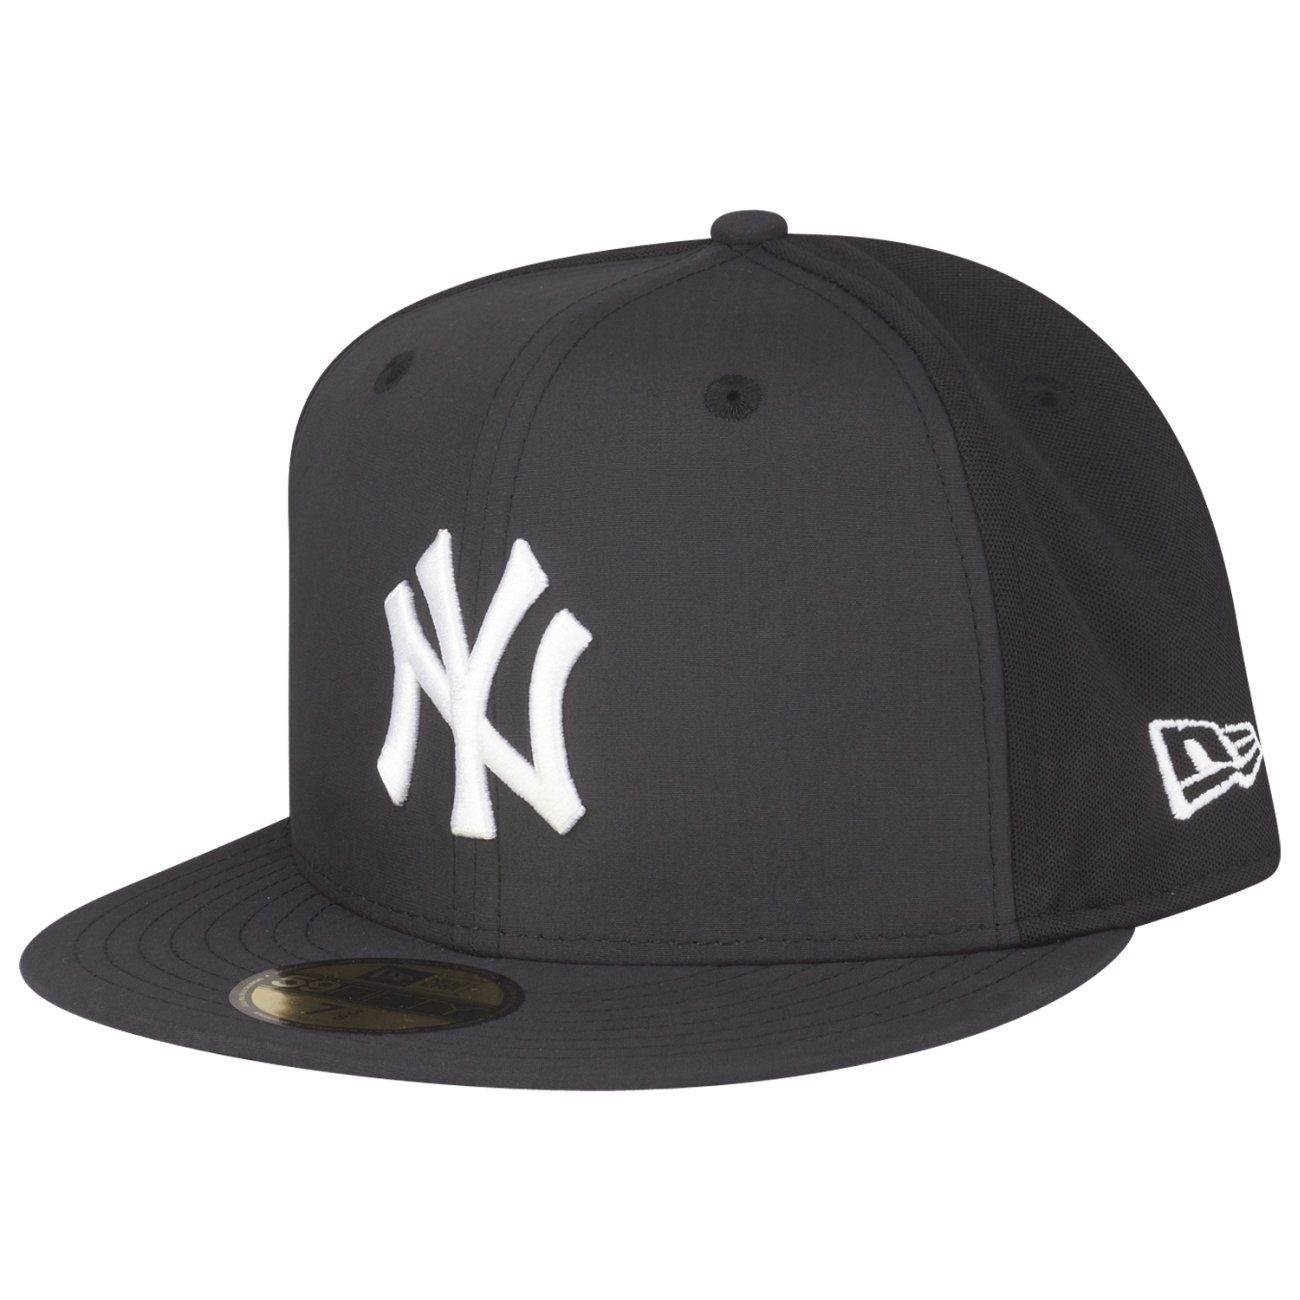 New Era Fitted Cap 59Fifty SPORT PIQUE New York Yankees | Fitted Caps